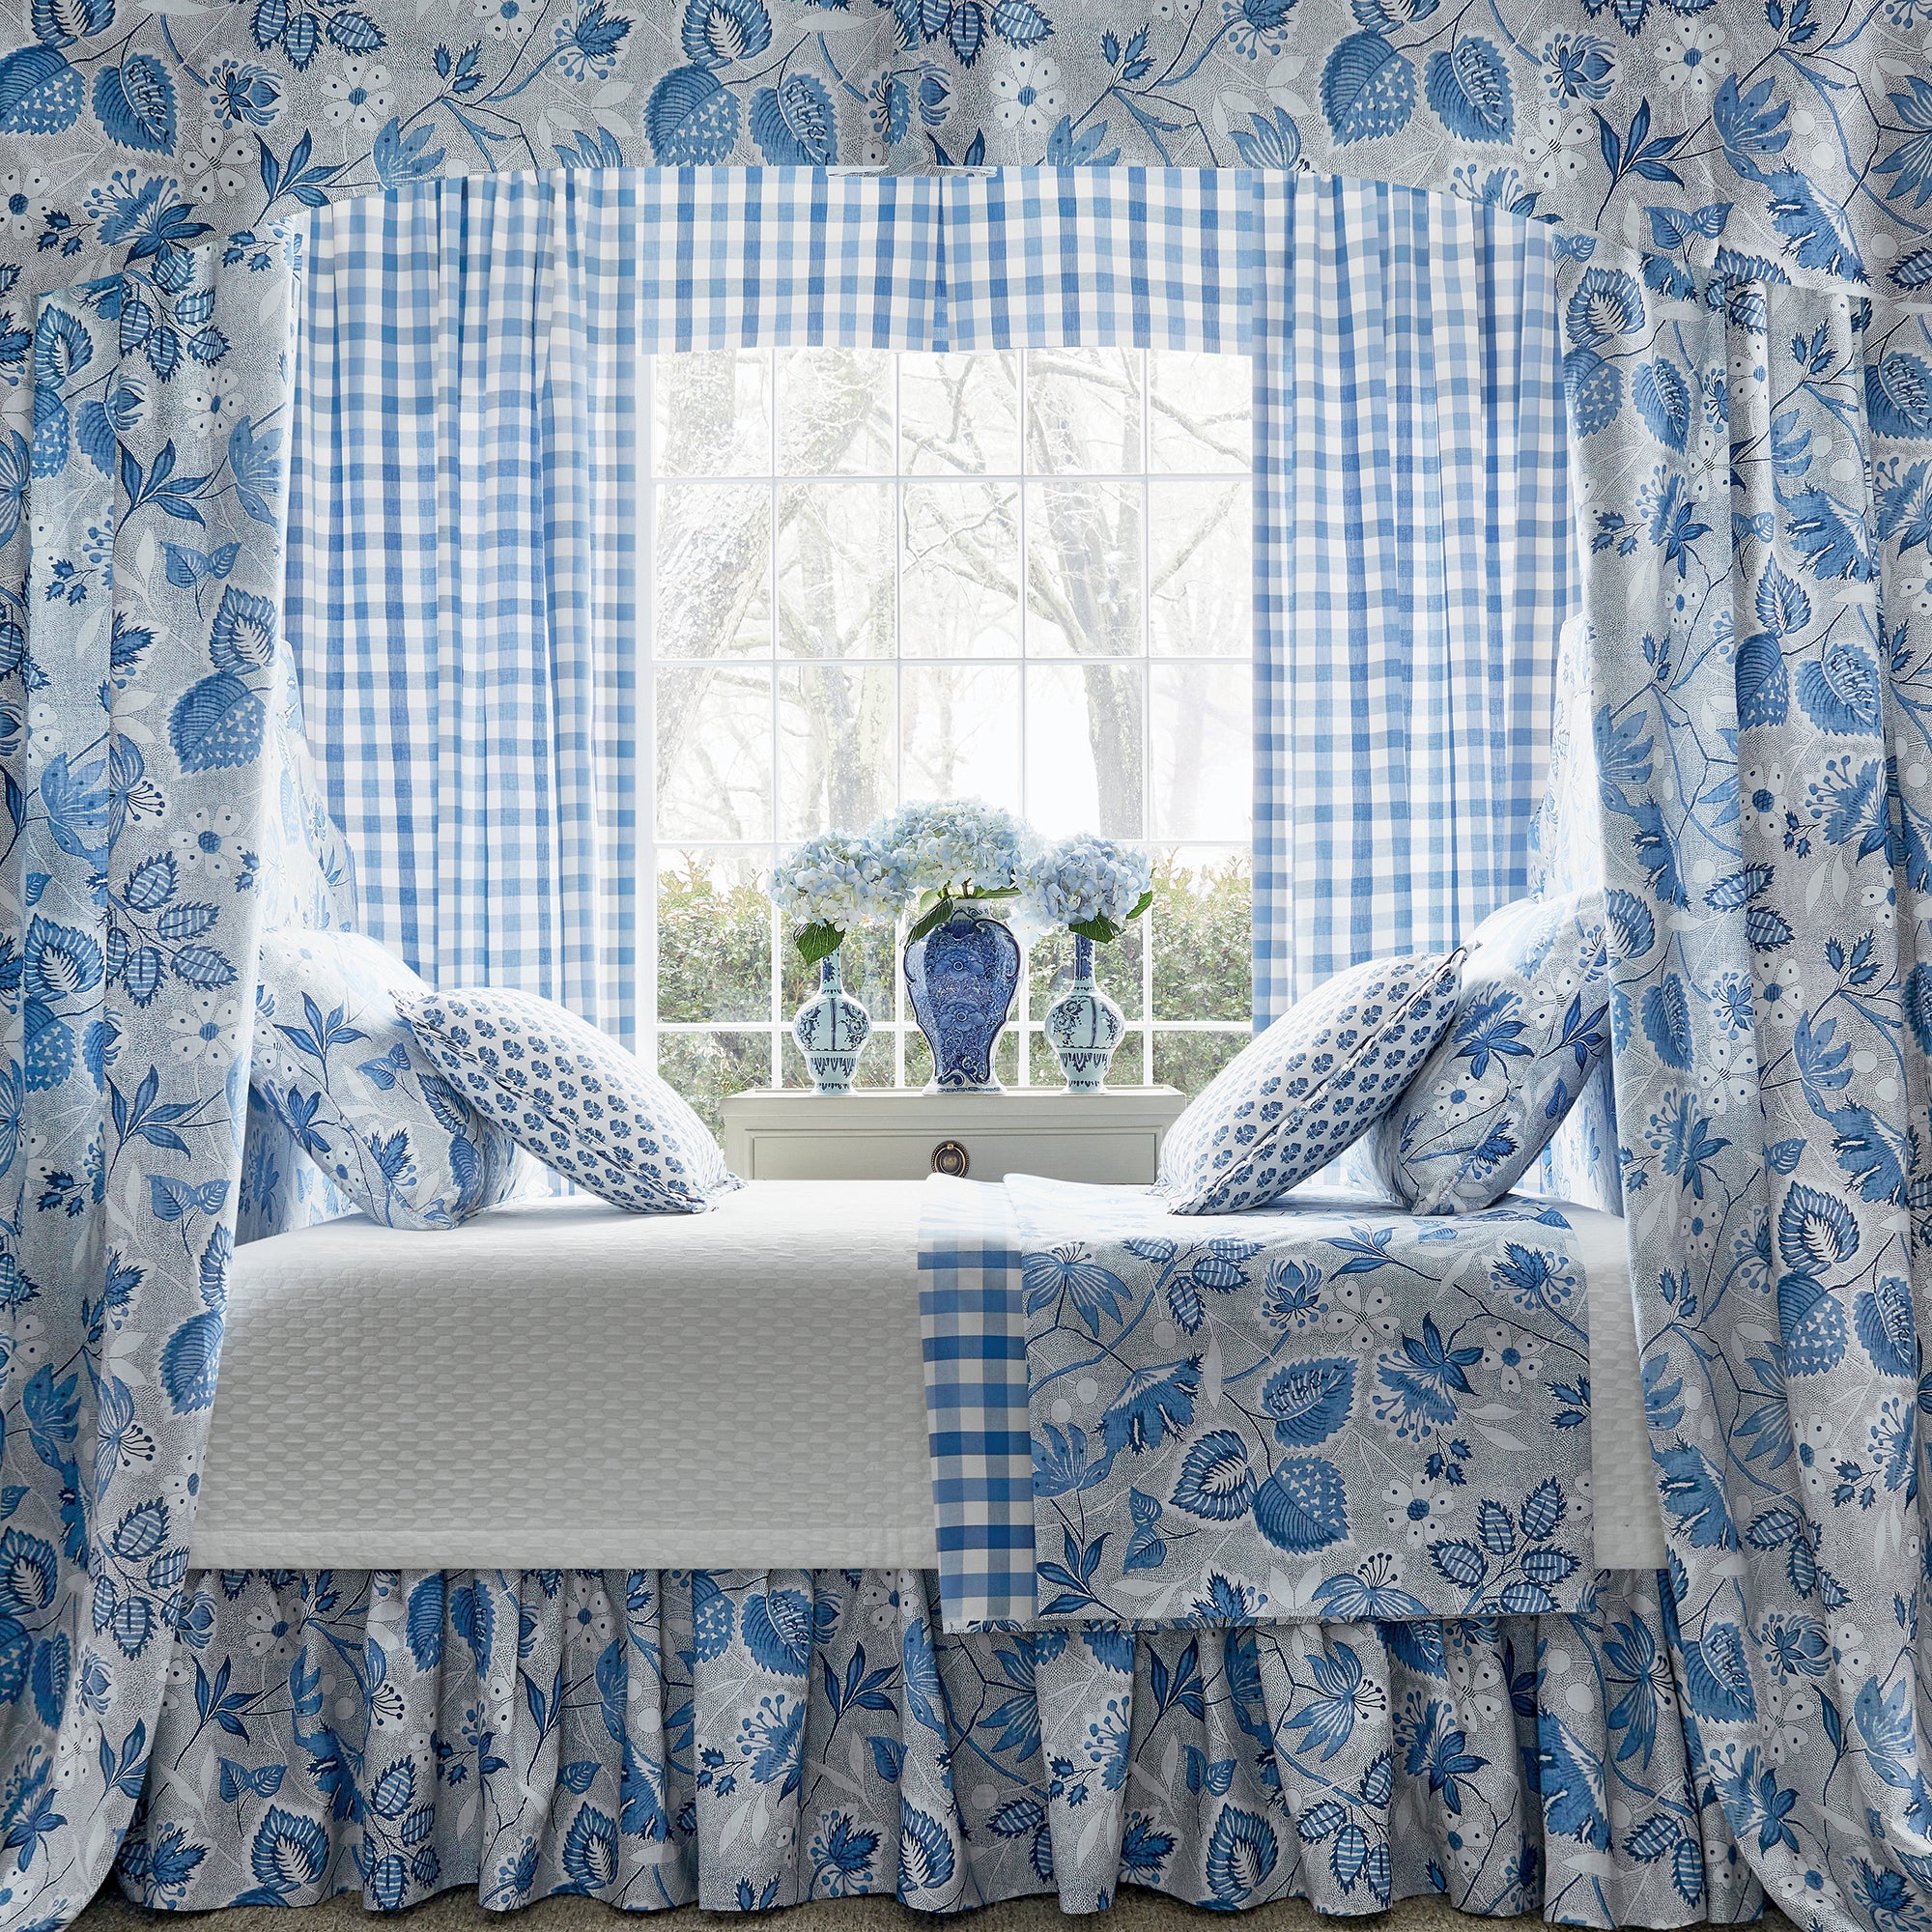 Bed Canopy, bedskirt and pillows in Indienne Hazel printed fabric in Blue - pattern number AF15116 - by Anna French in the Antilles collection